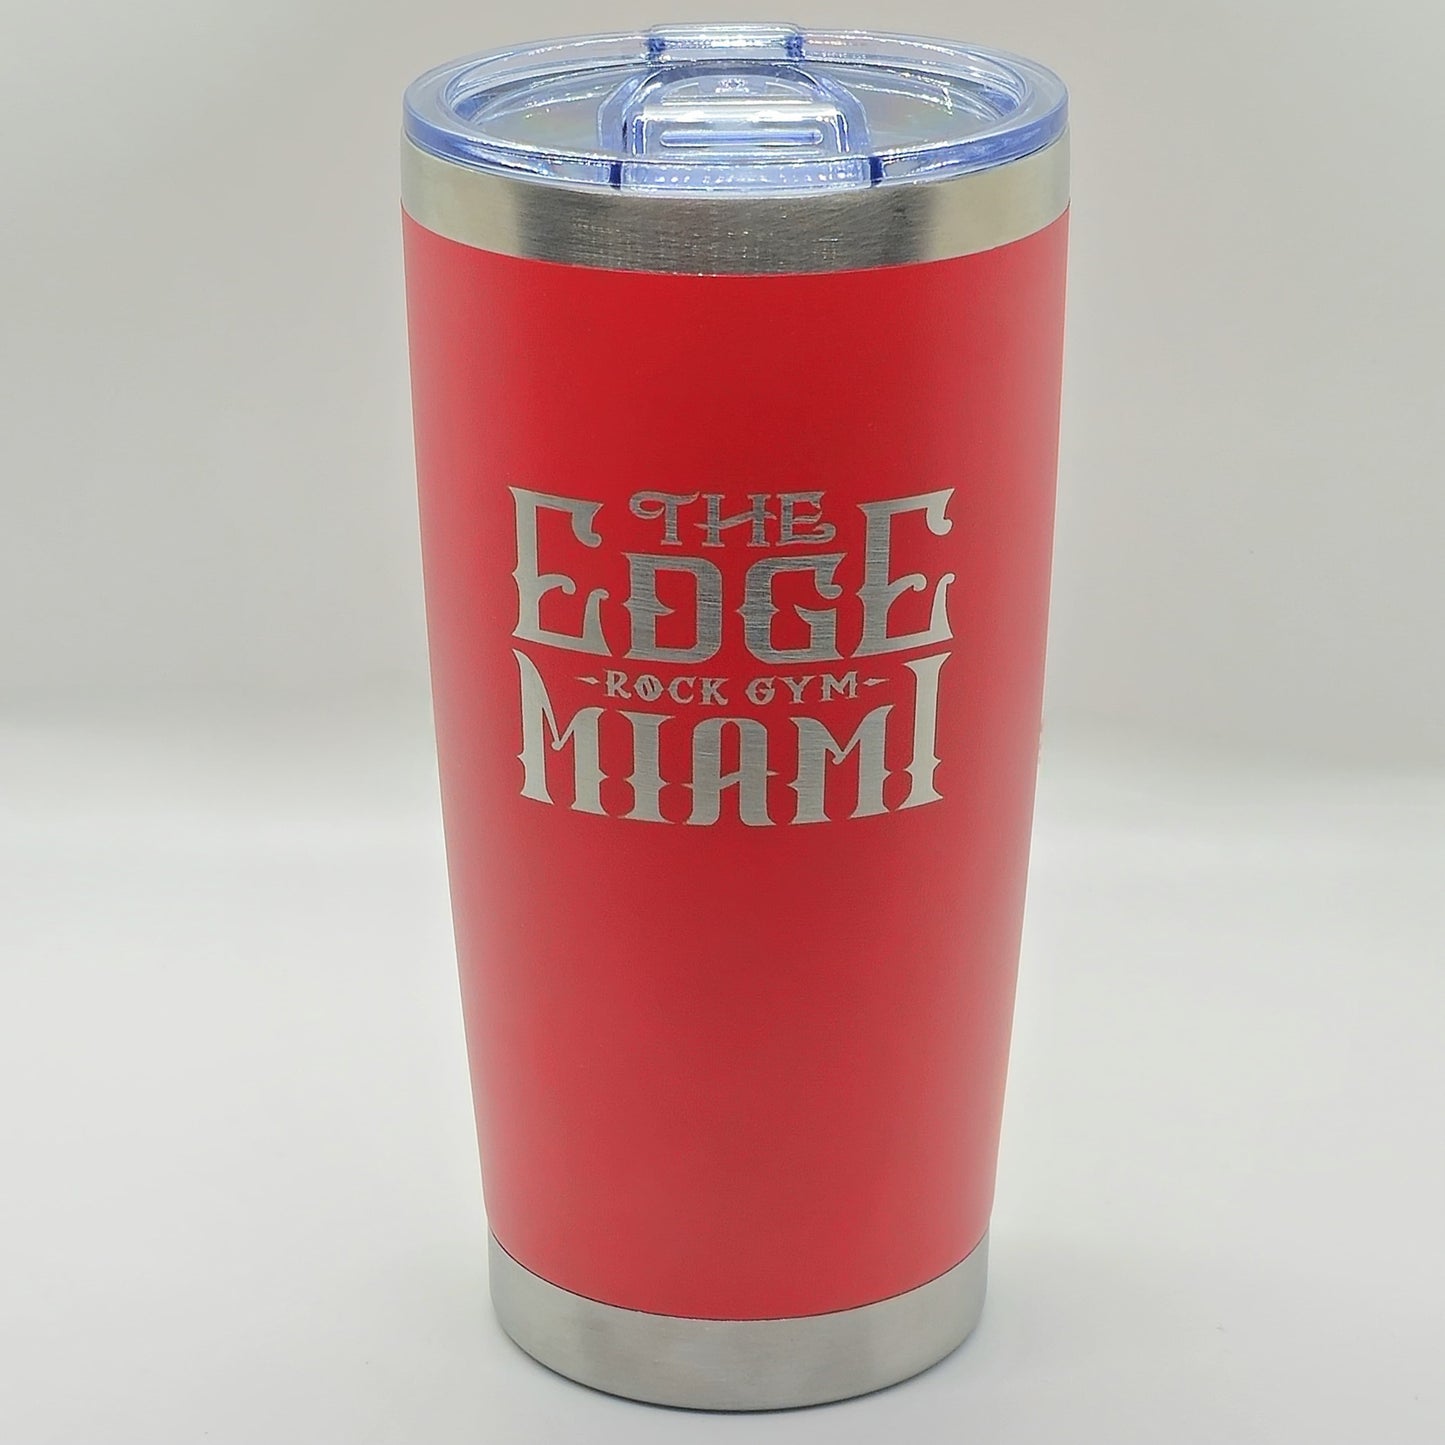 TERG Miami Stainless Steel Cup